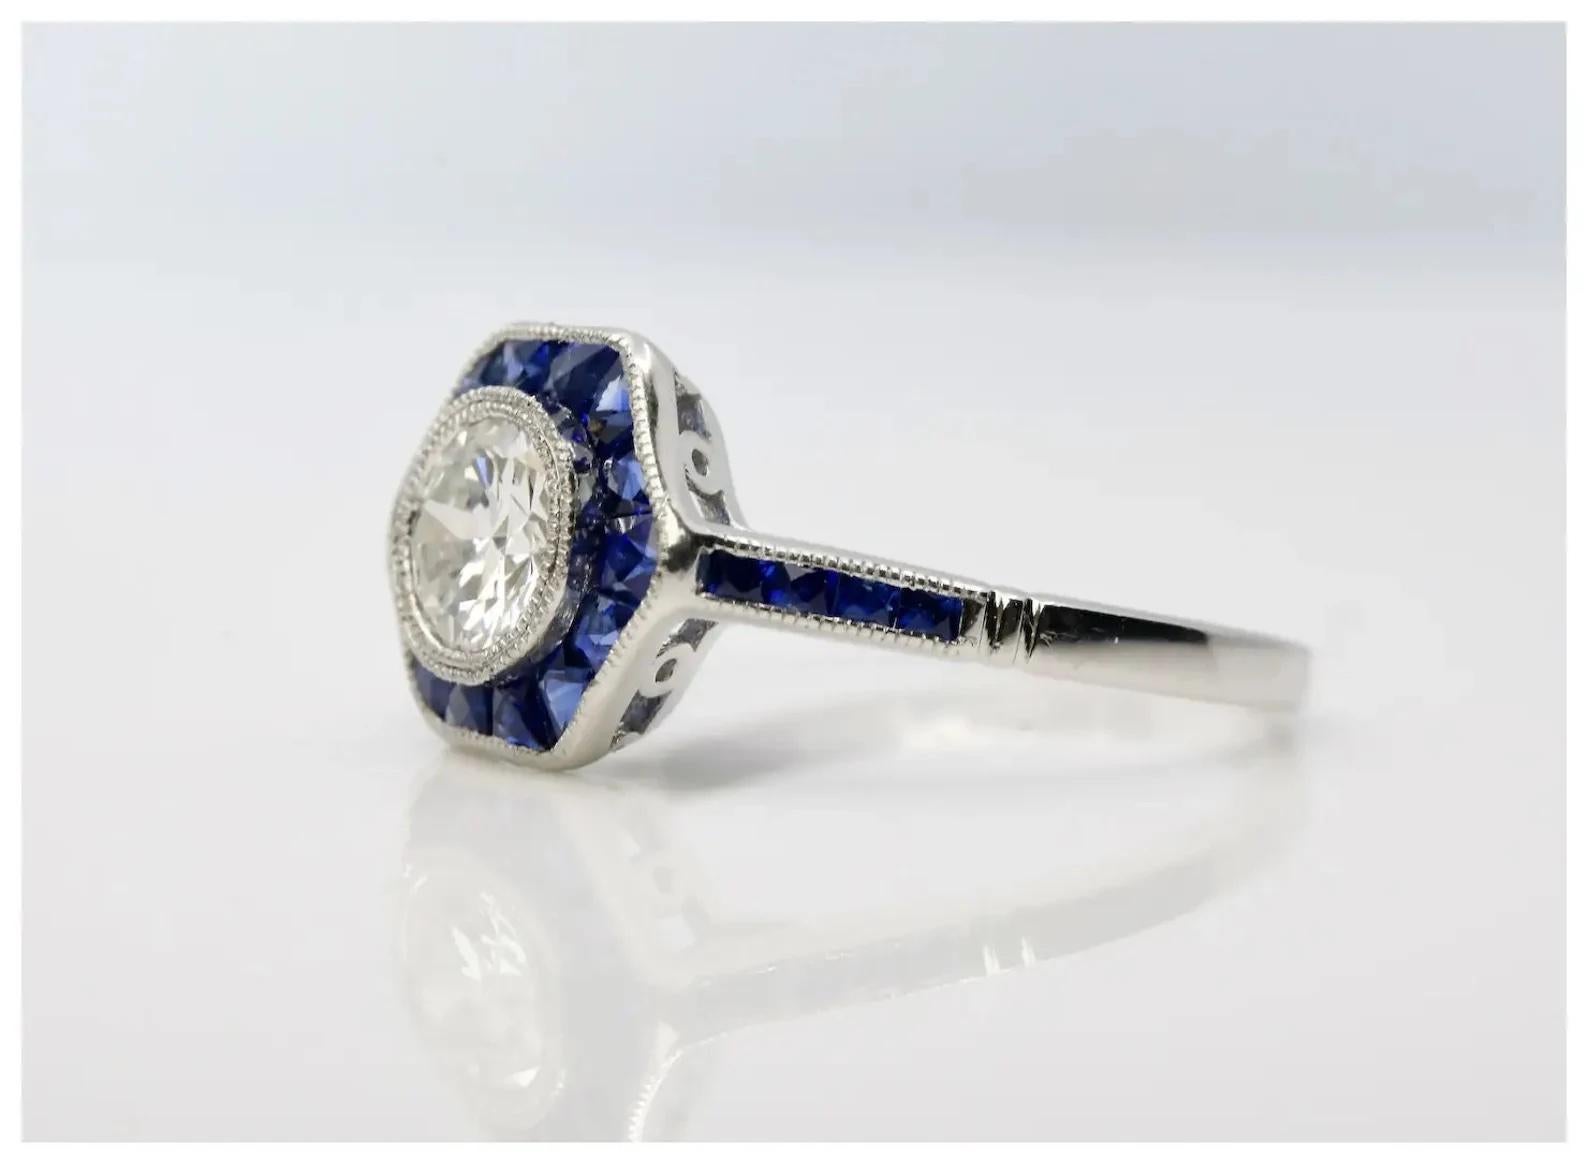 A beautiful Art Deco style diamond and French cut sapphire ring in platinum.

Centered by a bezel set old European cut diamond of 0.75 carats with H color and VS2 clarity.

Framed by 22 French cut blue sapphires of 0.68 cow bordered by miligrain